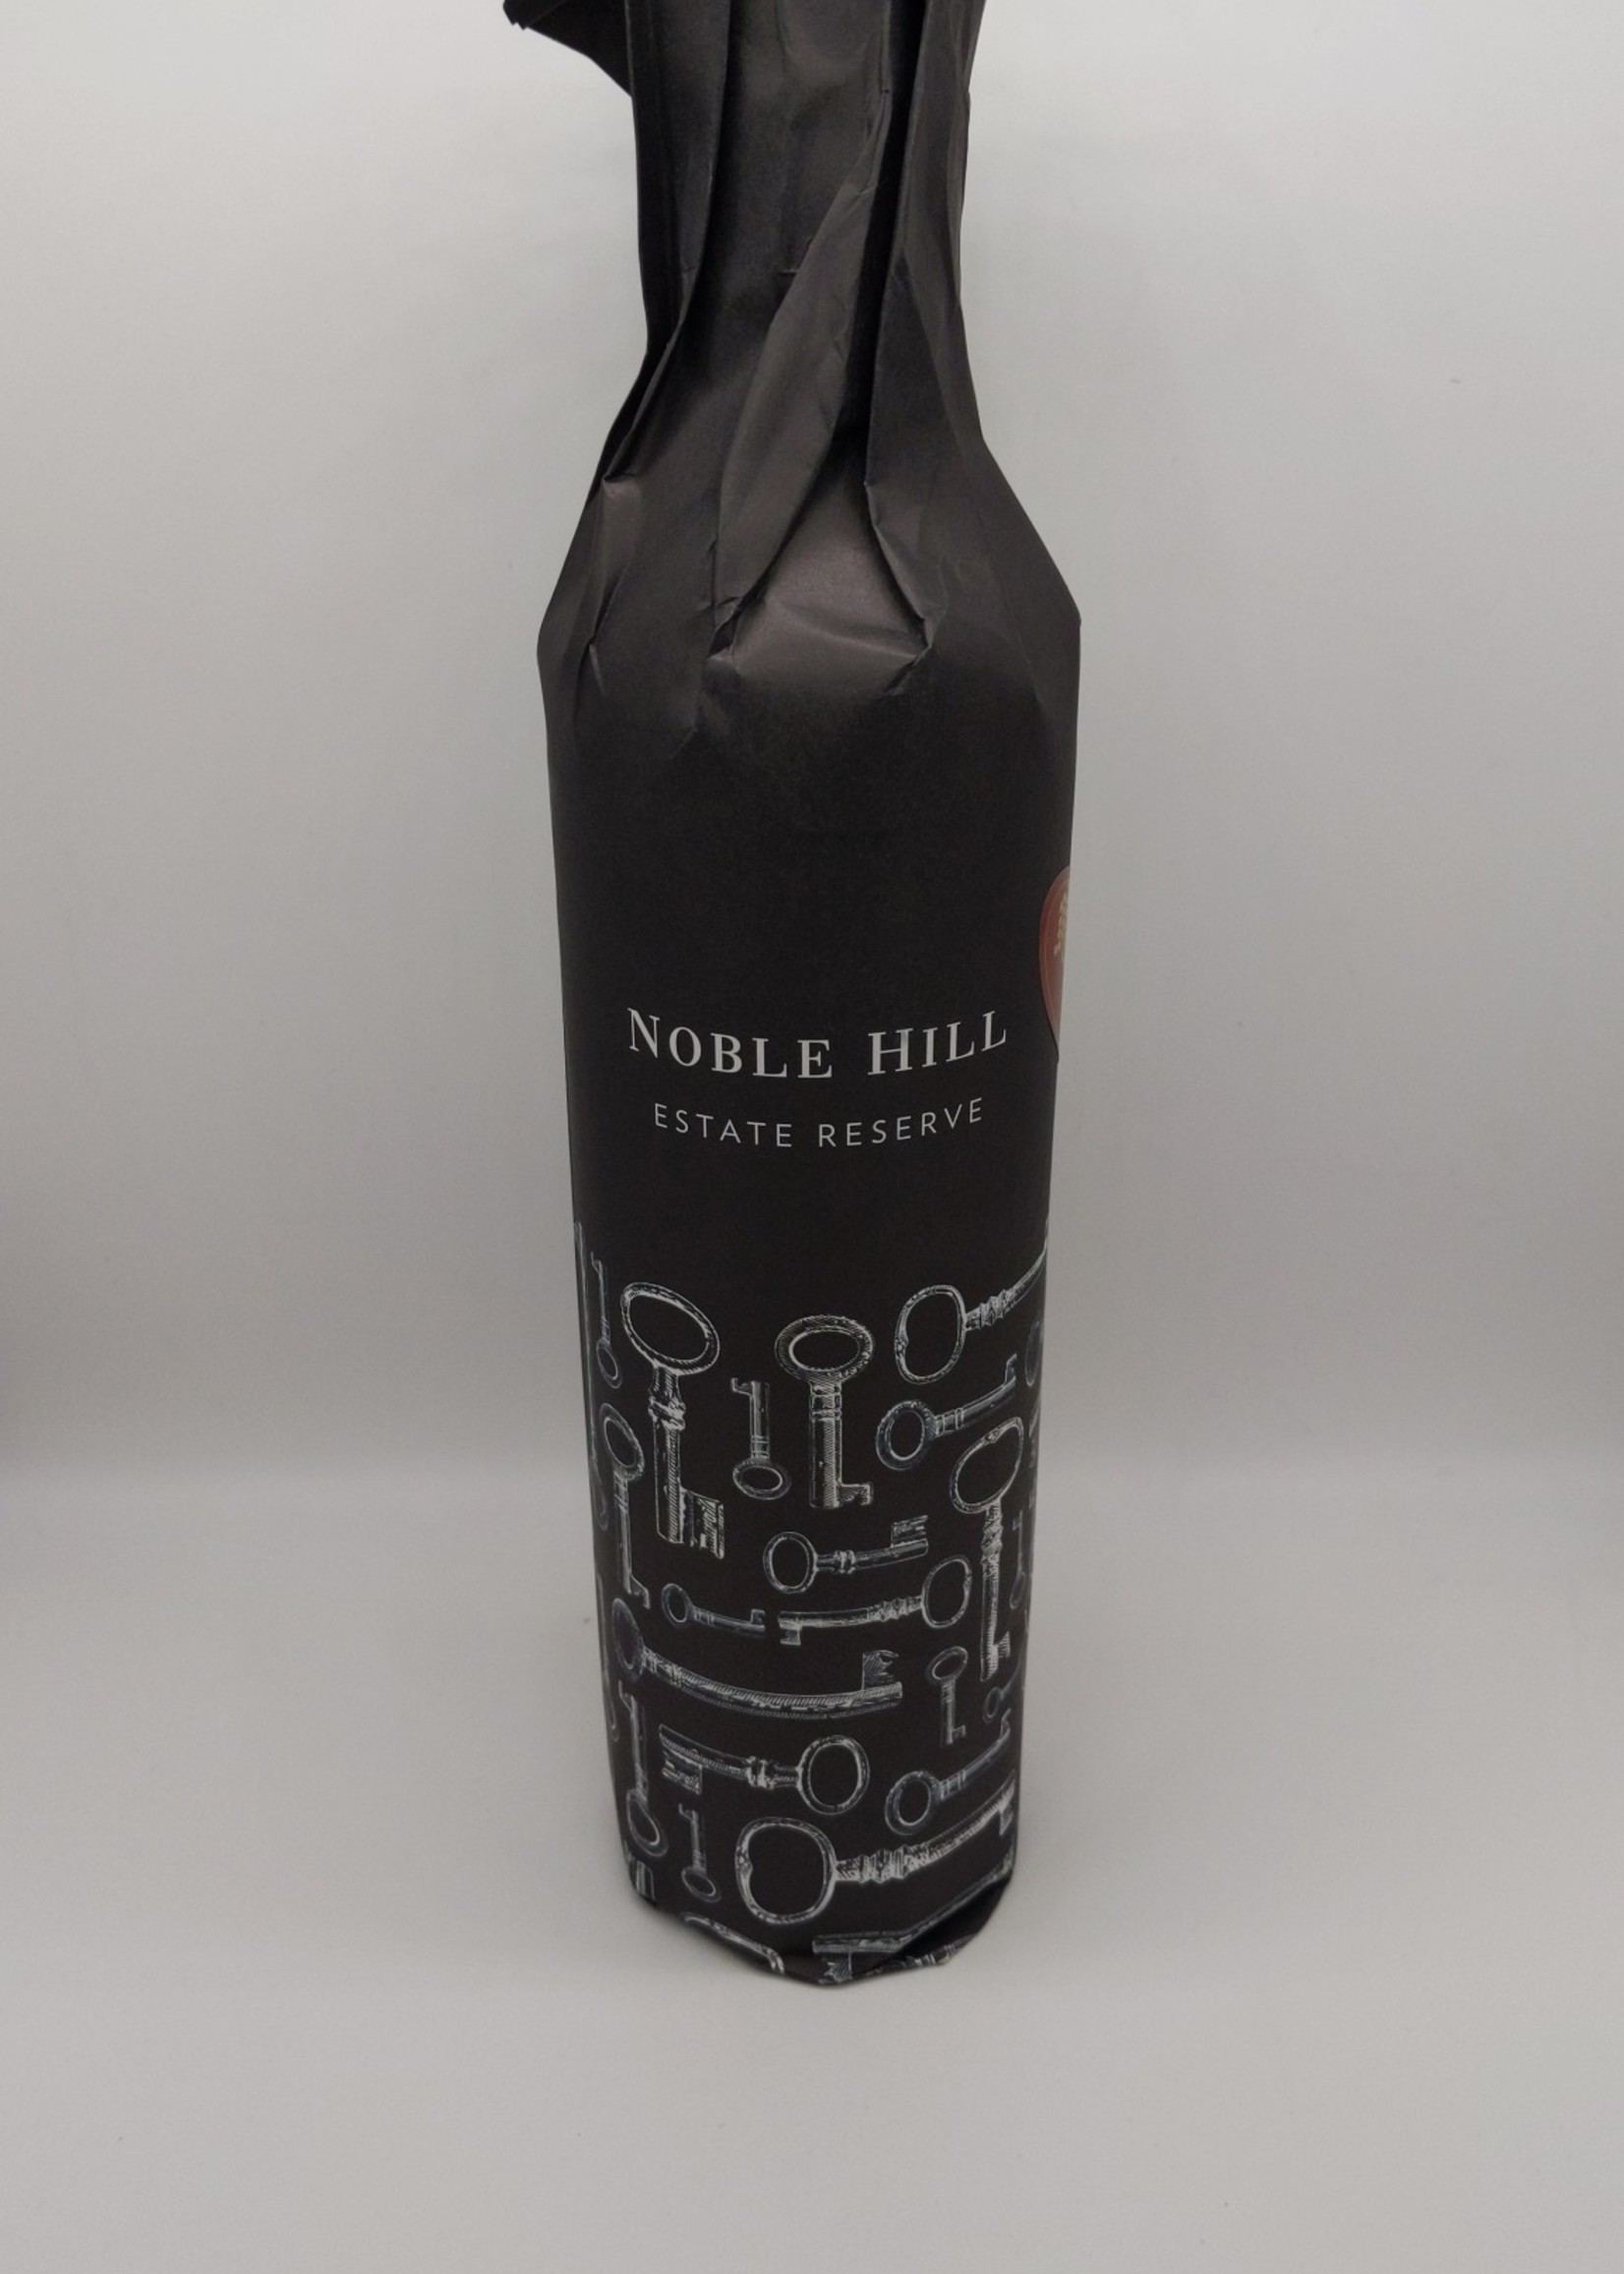 2019 NOBLE HILL ESTATE RESERVE RED 750ml